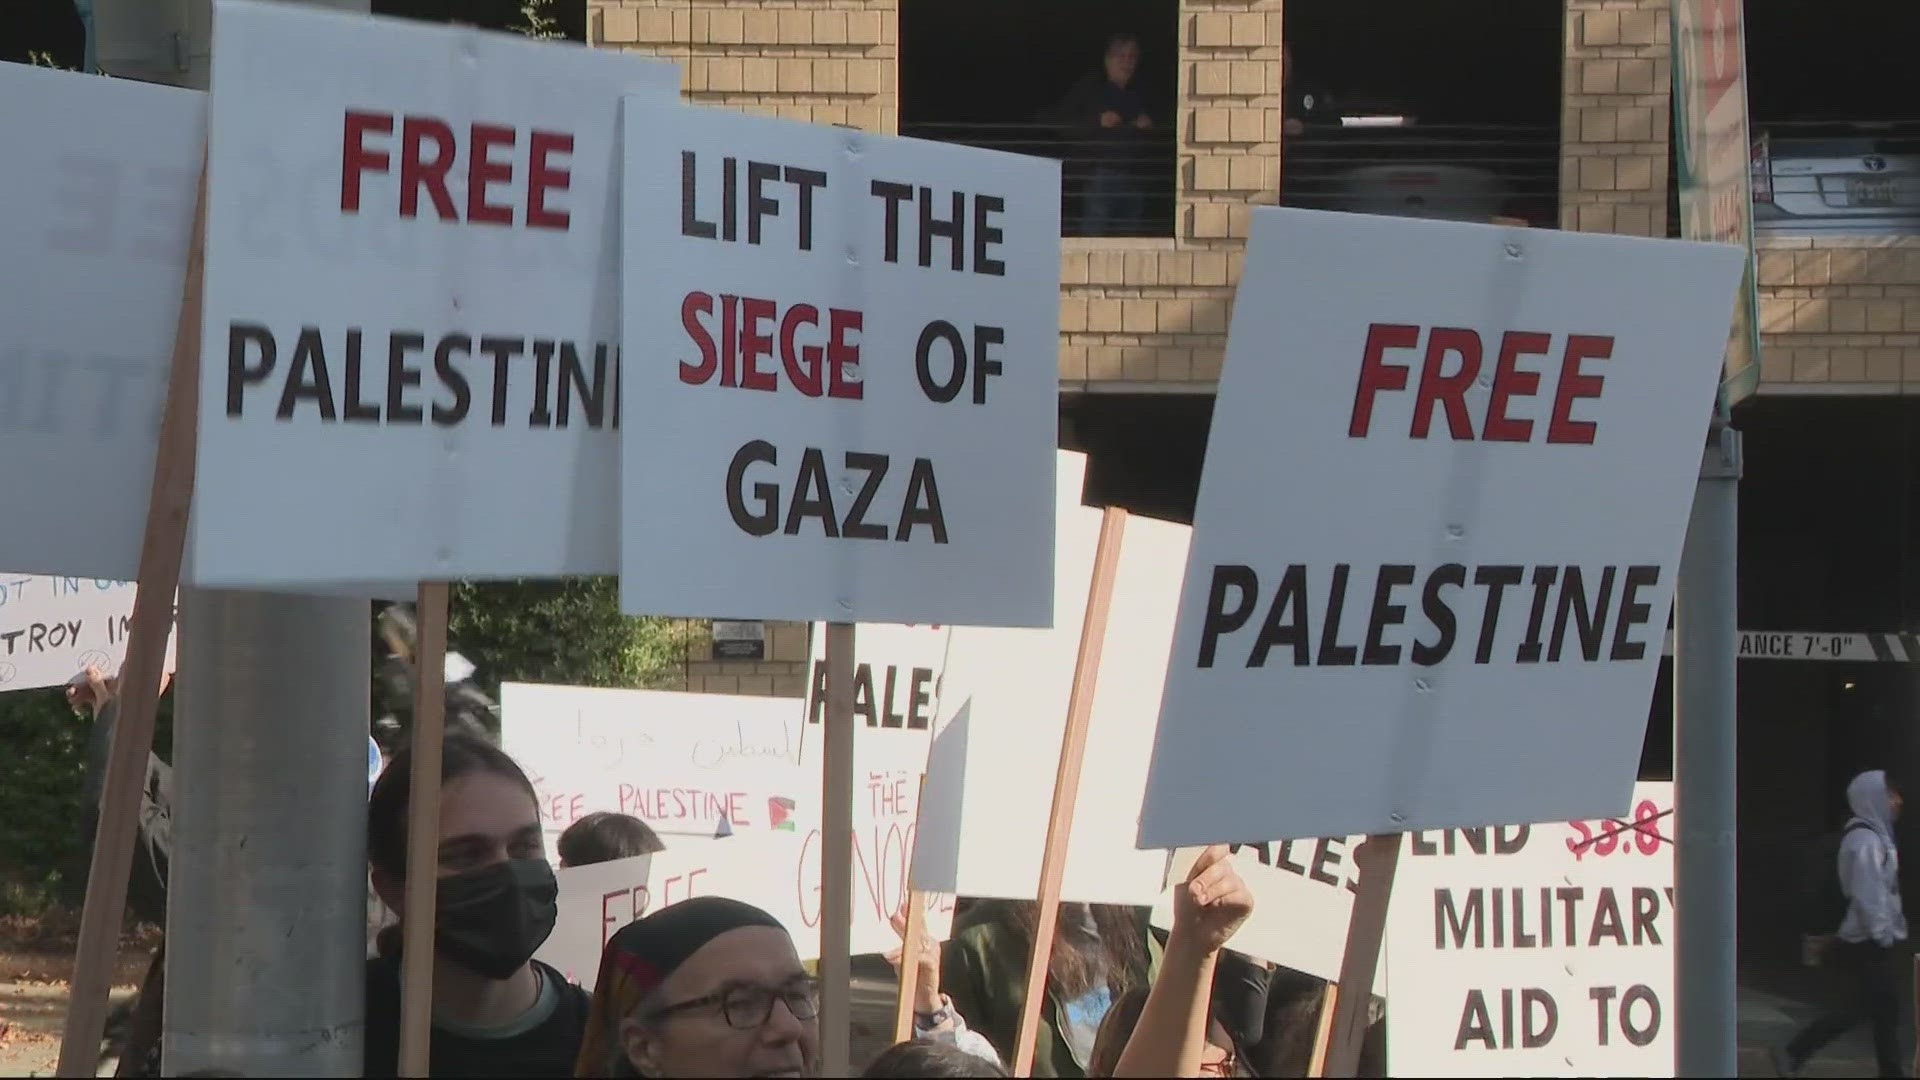 The Portland chapter of Jewish Voice for Peace called an emergency rally outside the officers of Senator Ron Wyden and Representative Earl Blumenauer.